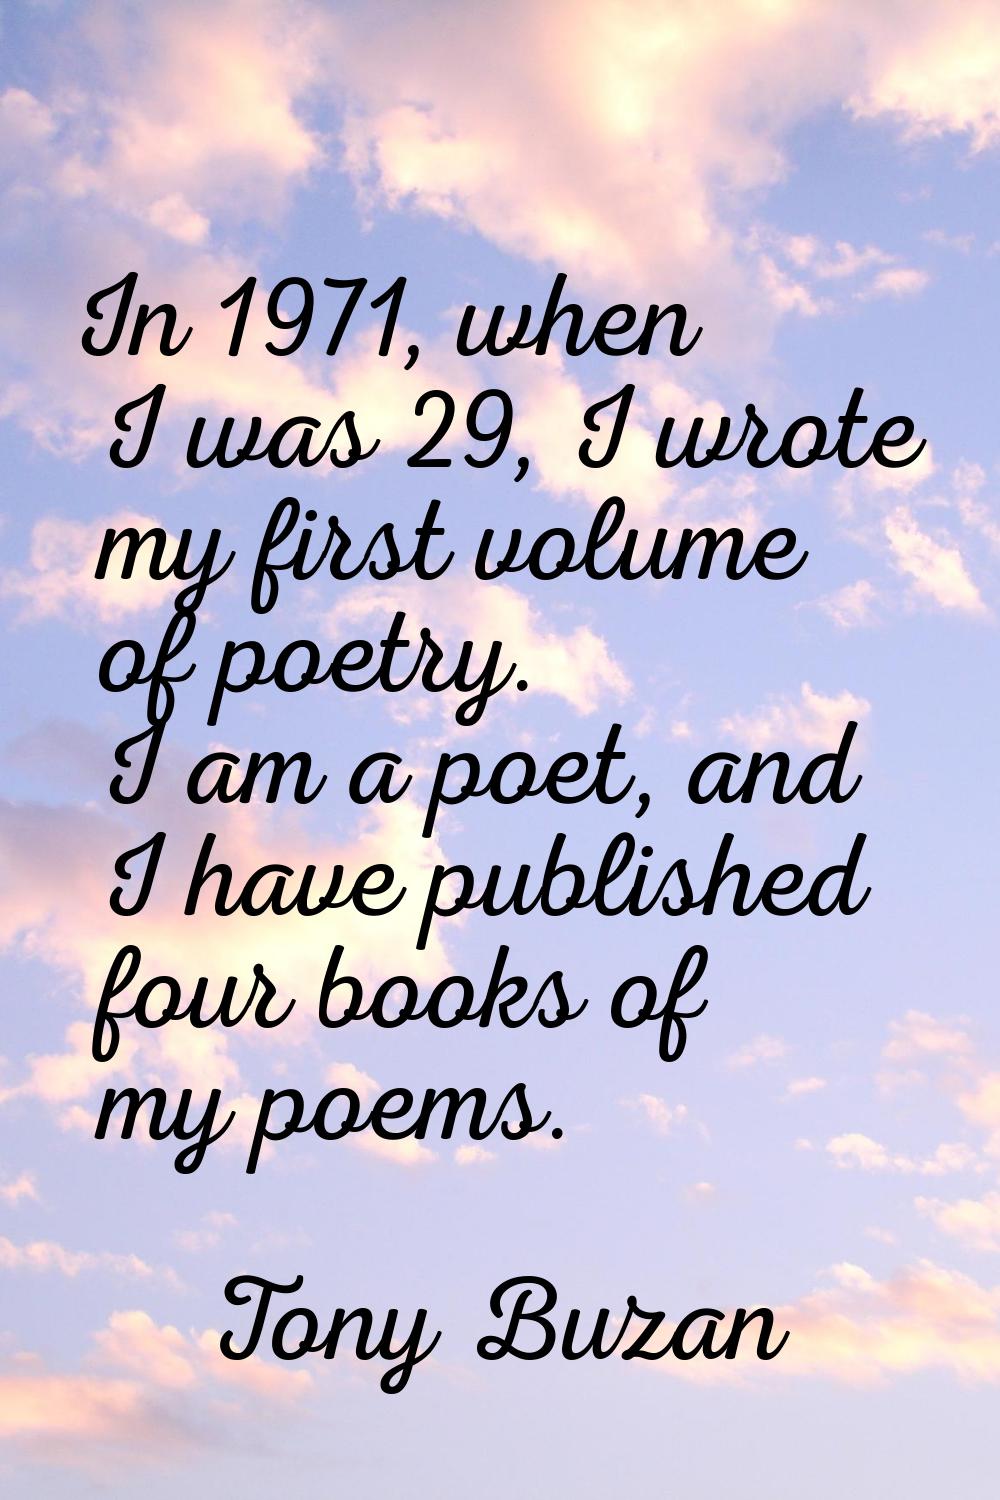 In 1971, when I was 29, I wrote my first volume of poetry. I am a poet, and I have published four b